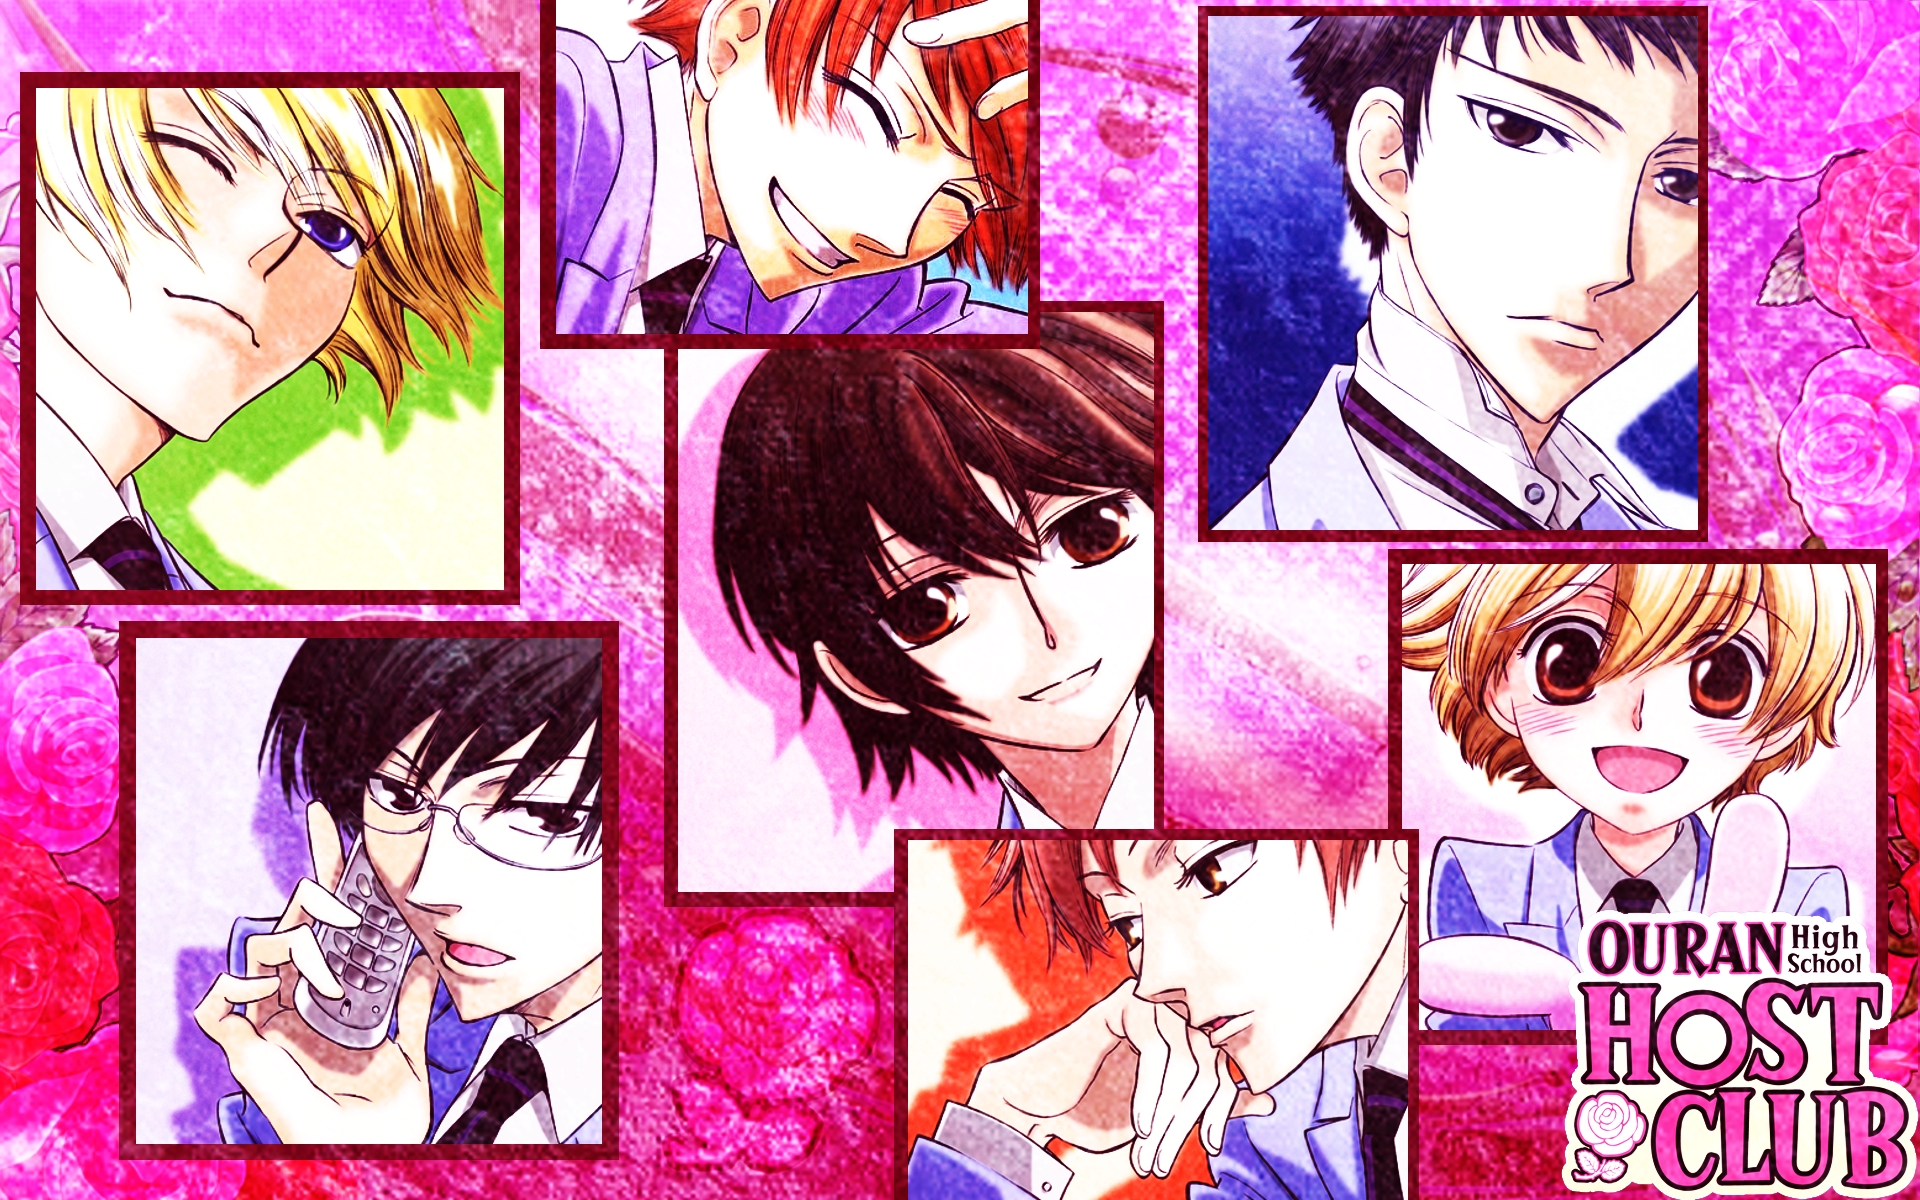 HD desktop wallpaper featuring a collage of Ouran High School Host Club characters on a vibrant pink background.